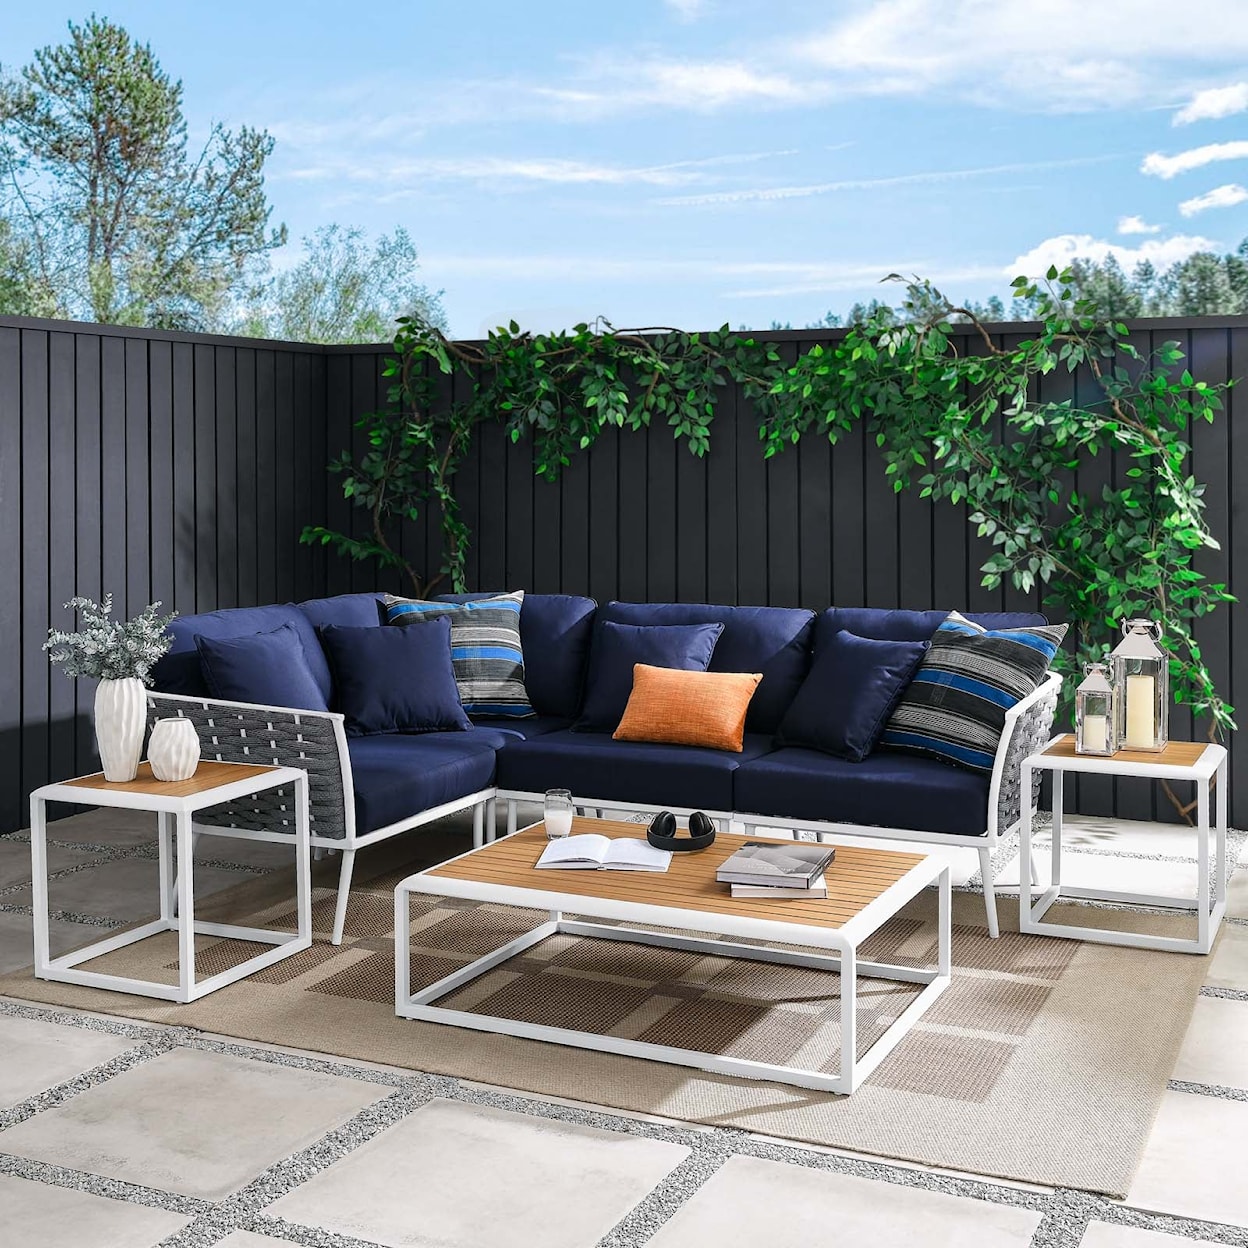 Modway Stance Stance 7 Piece Outdoor Sofa Set